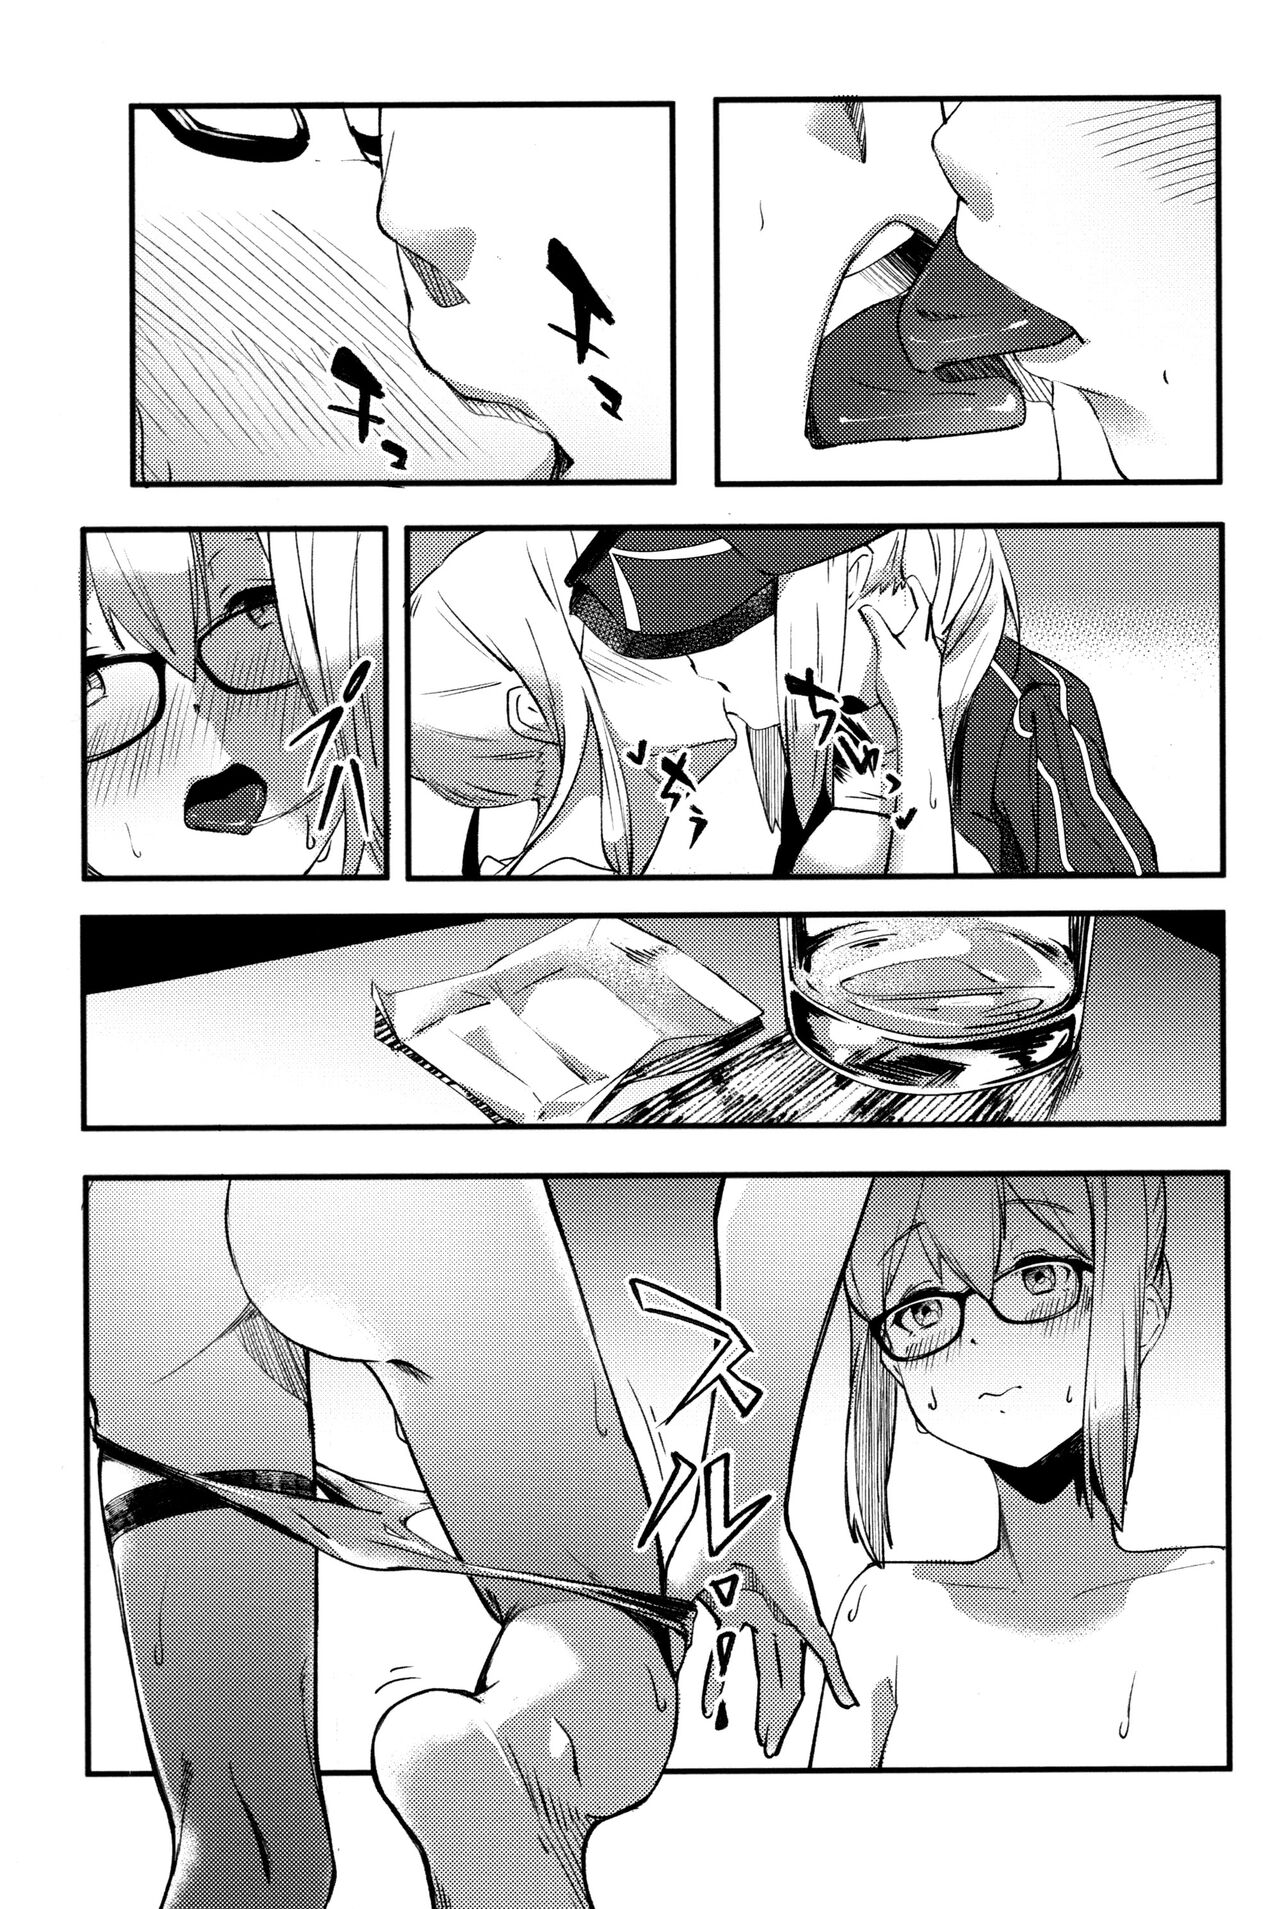 (C97) [picapicaすっぱ (すっぱ)] kiss the future (Fate/Grand Order) [英訳]